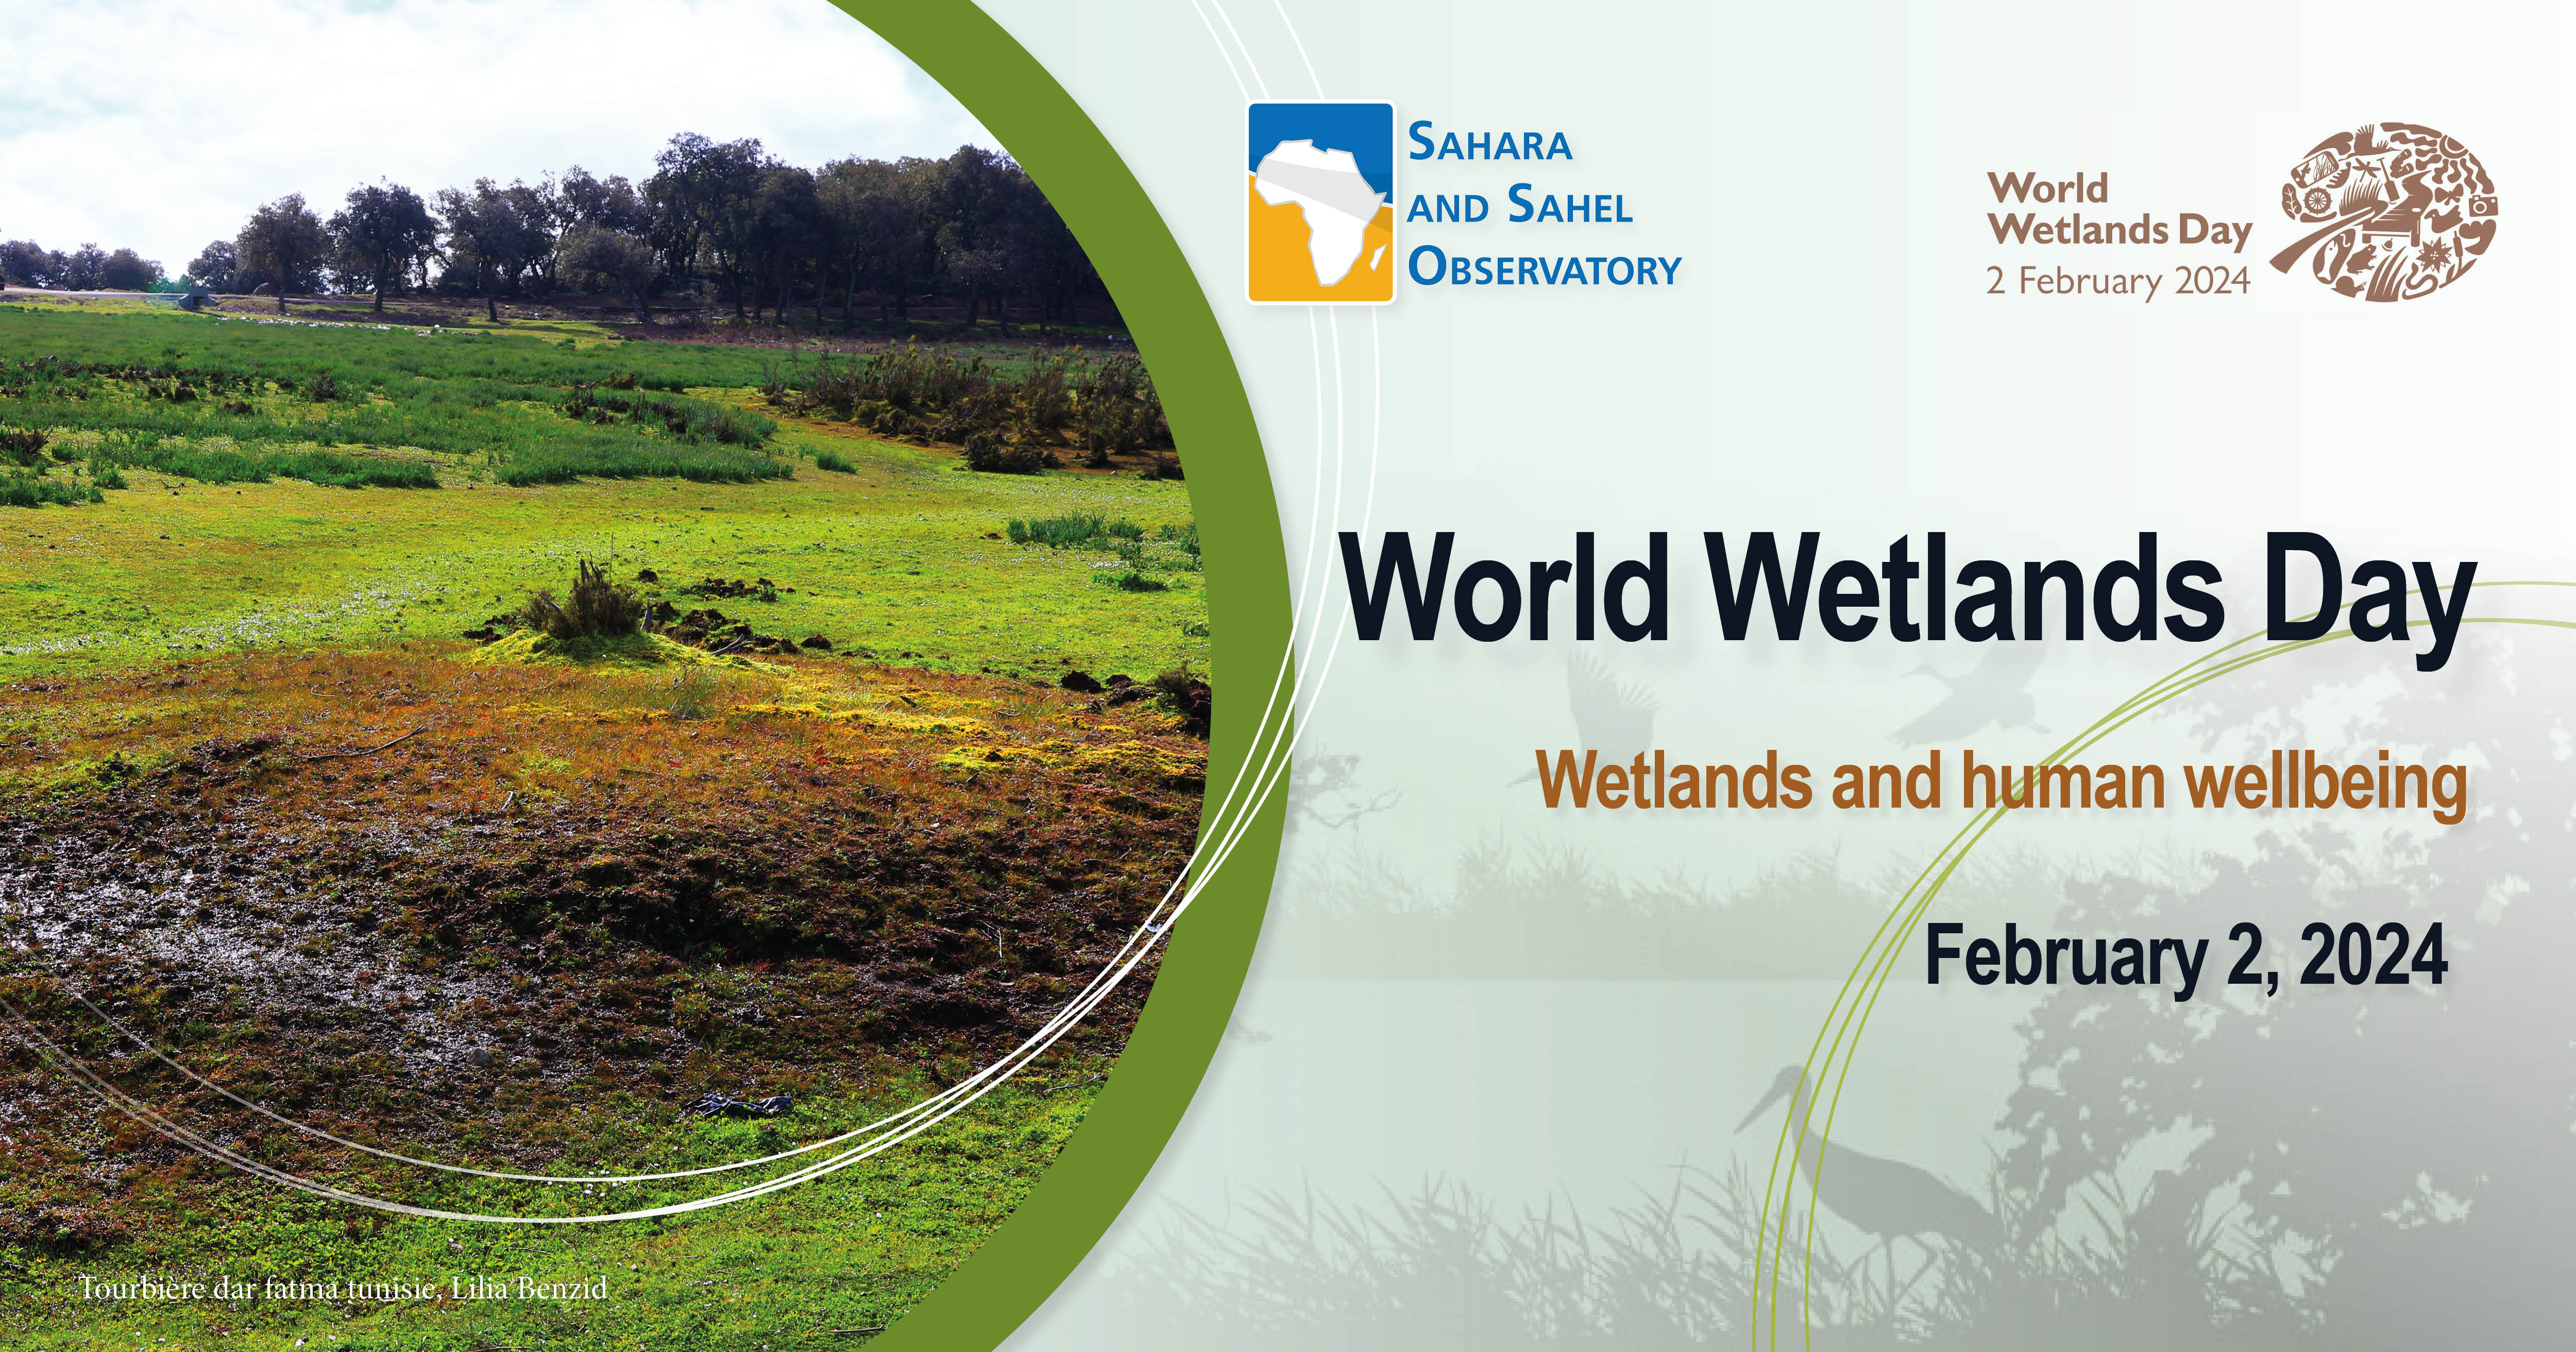 World Wetlands Day "Wetlands, Sources of Human Well-being," February 2, 2024